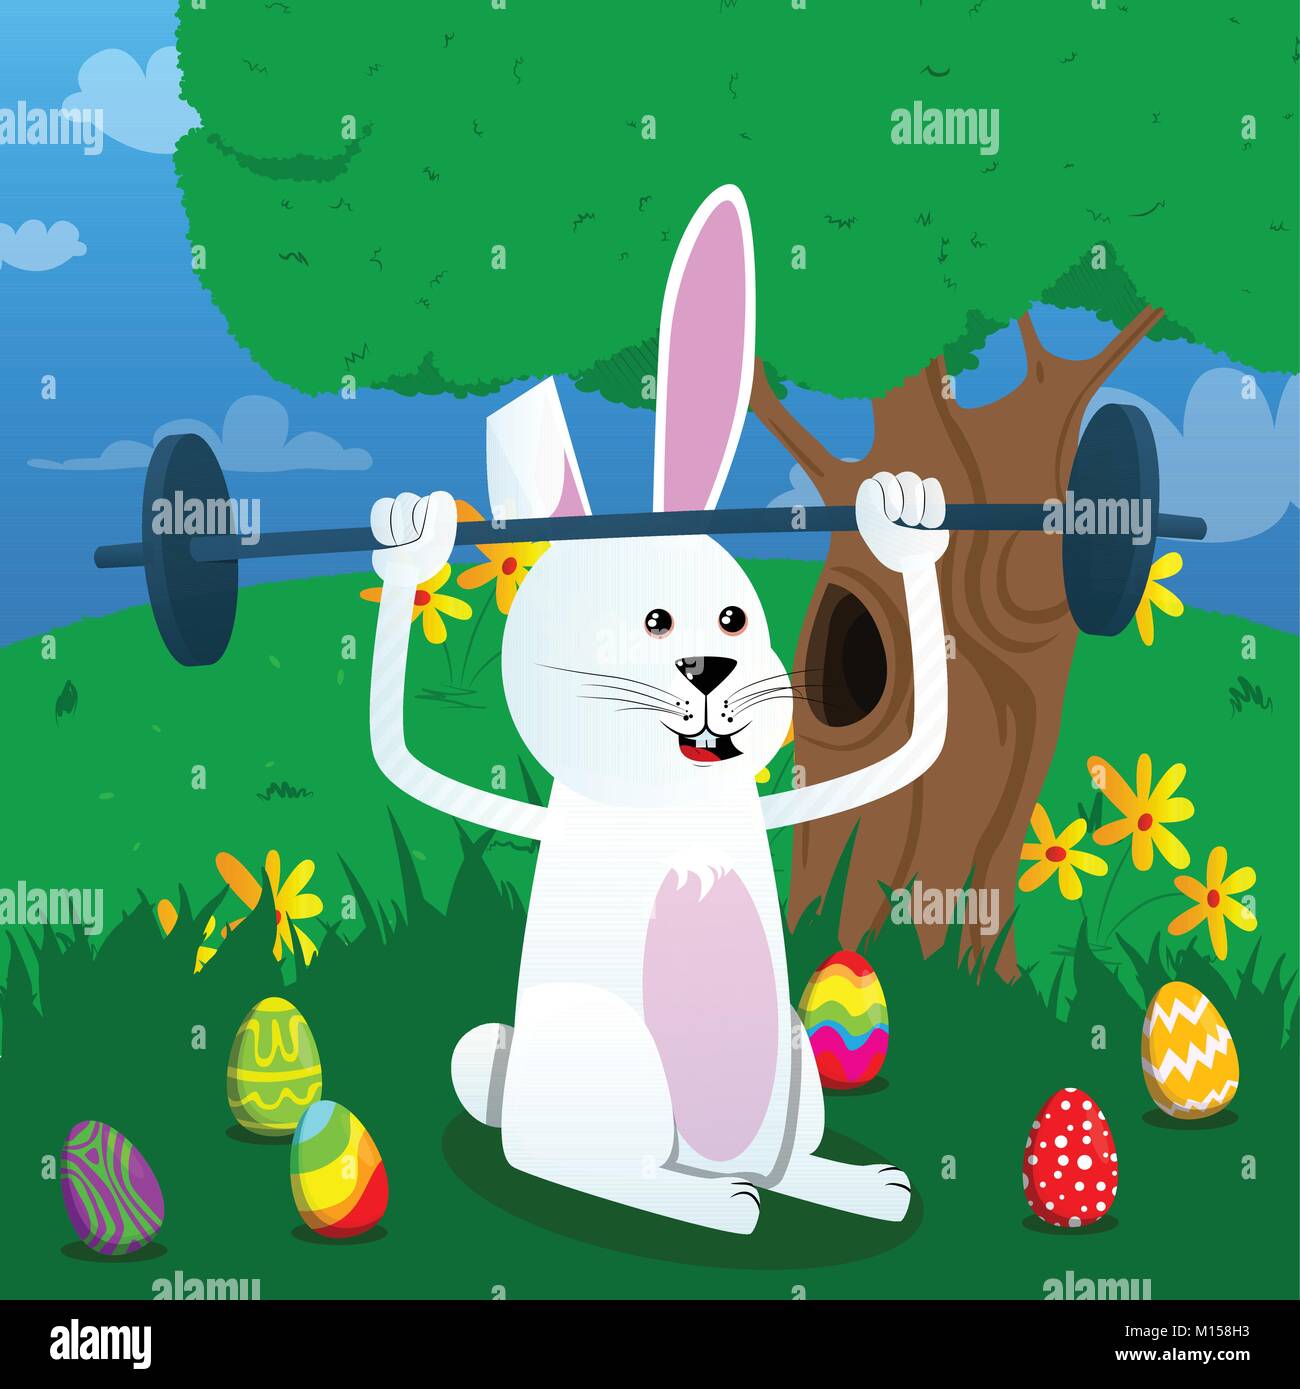 Gym bunny Stock Vector Images - Alamy